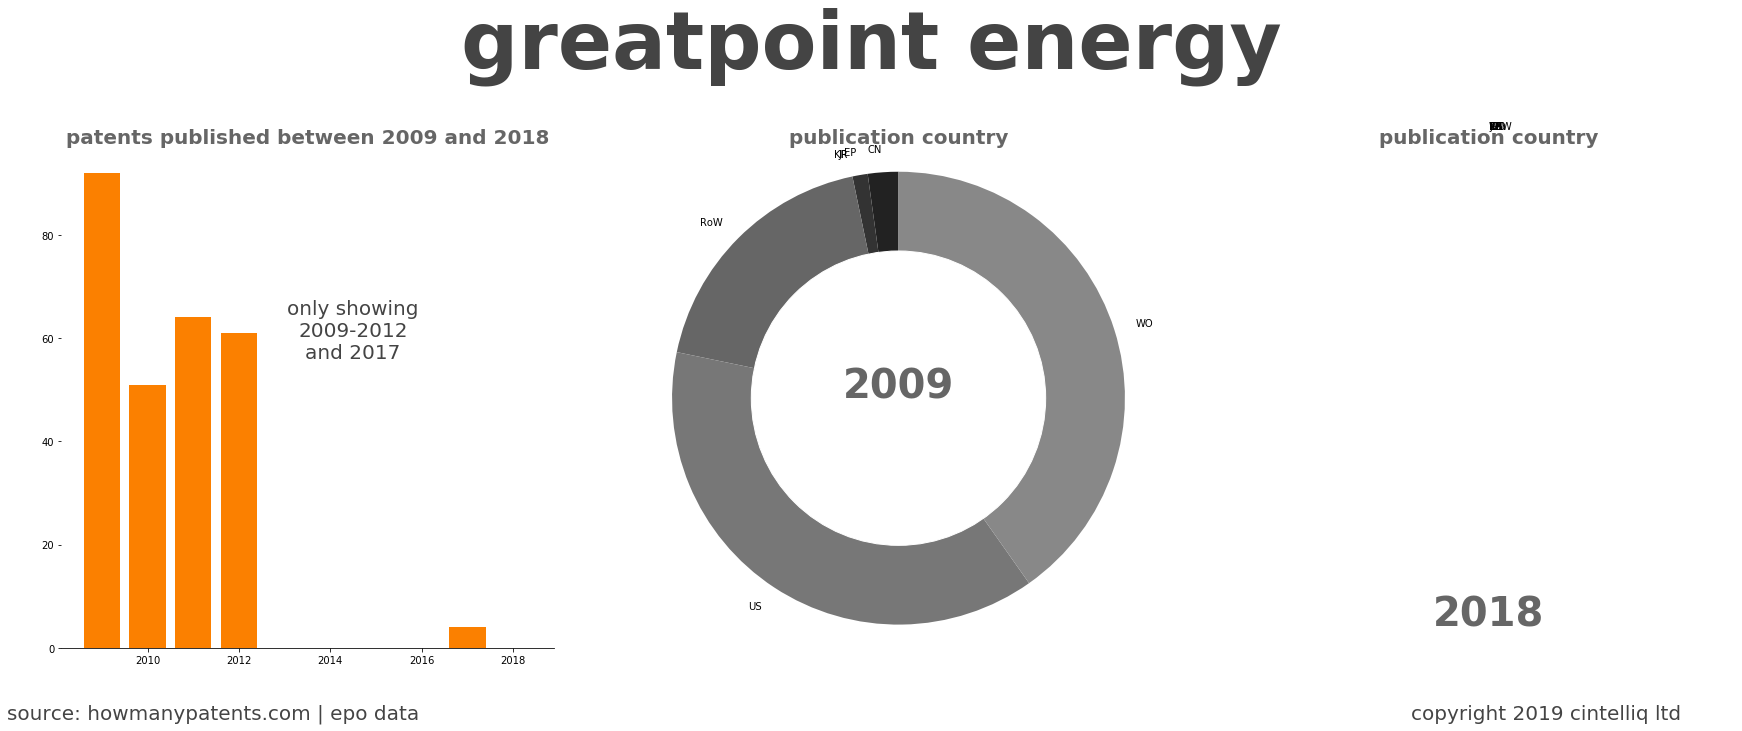 summary of patents for Greatpoint Energy